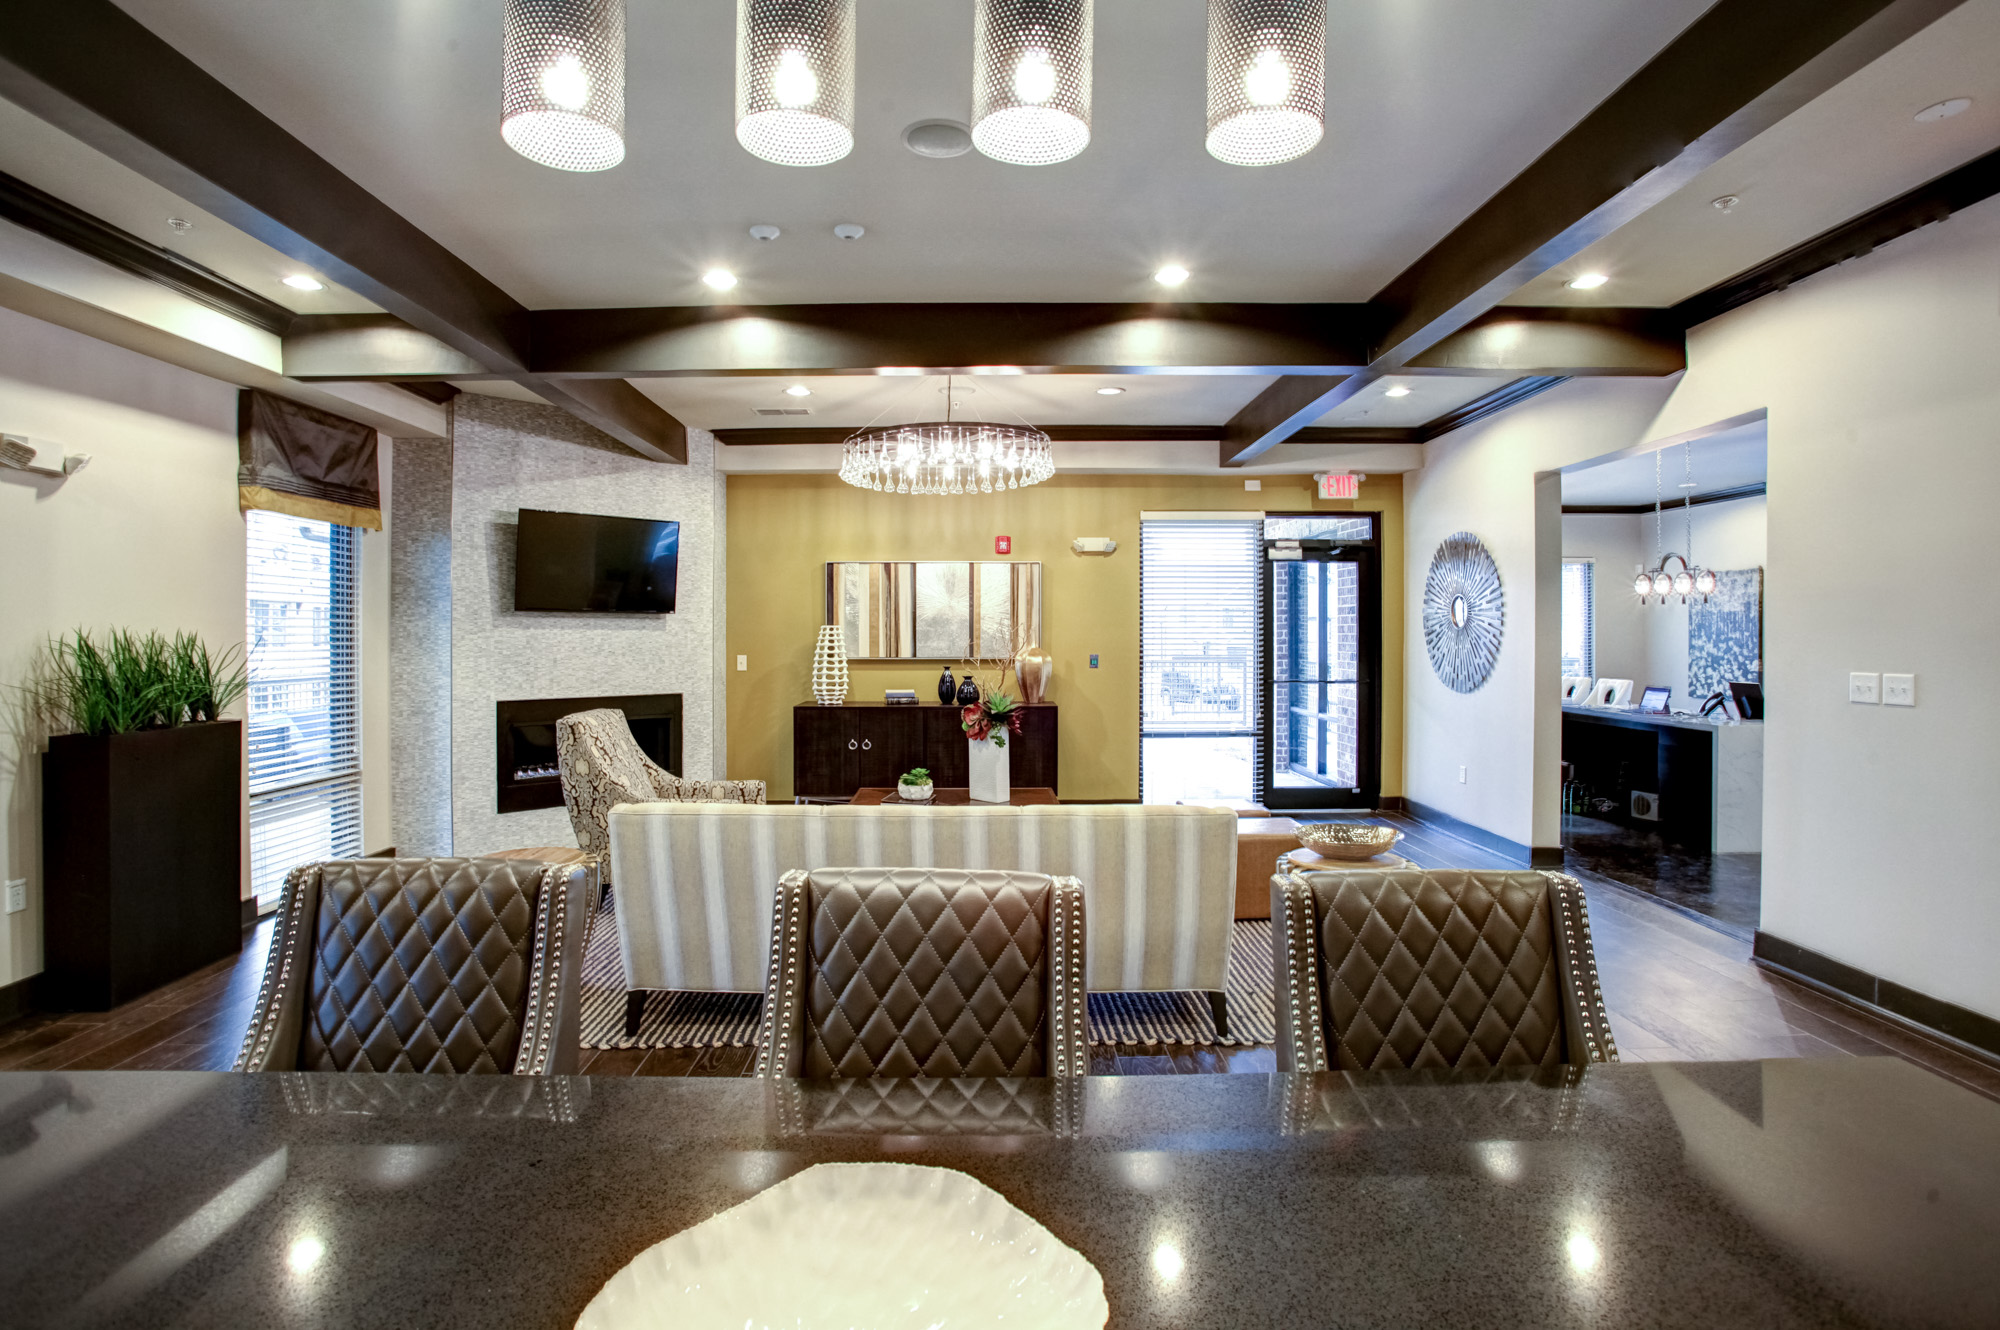 Three bar stools are in the foreground with a seating area, tv, and fireplace in the background.